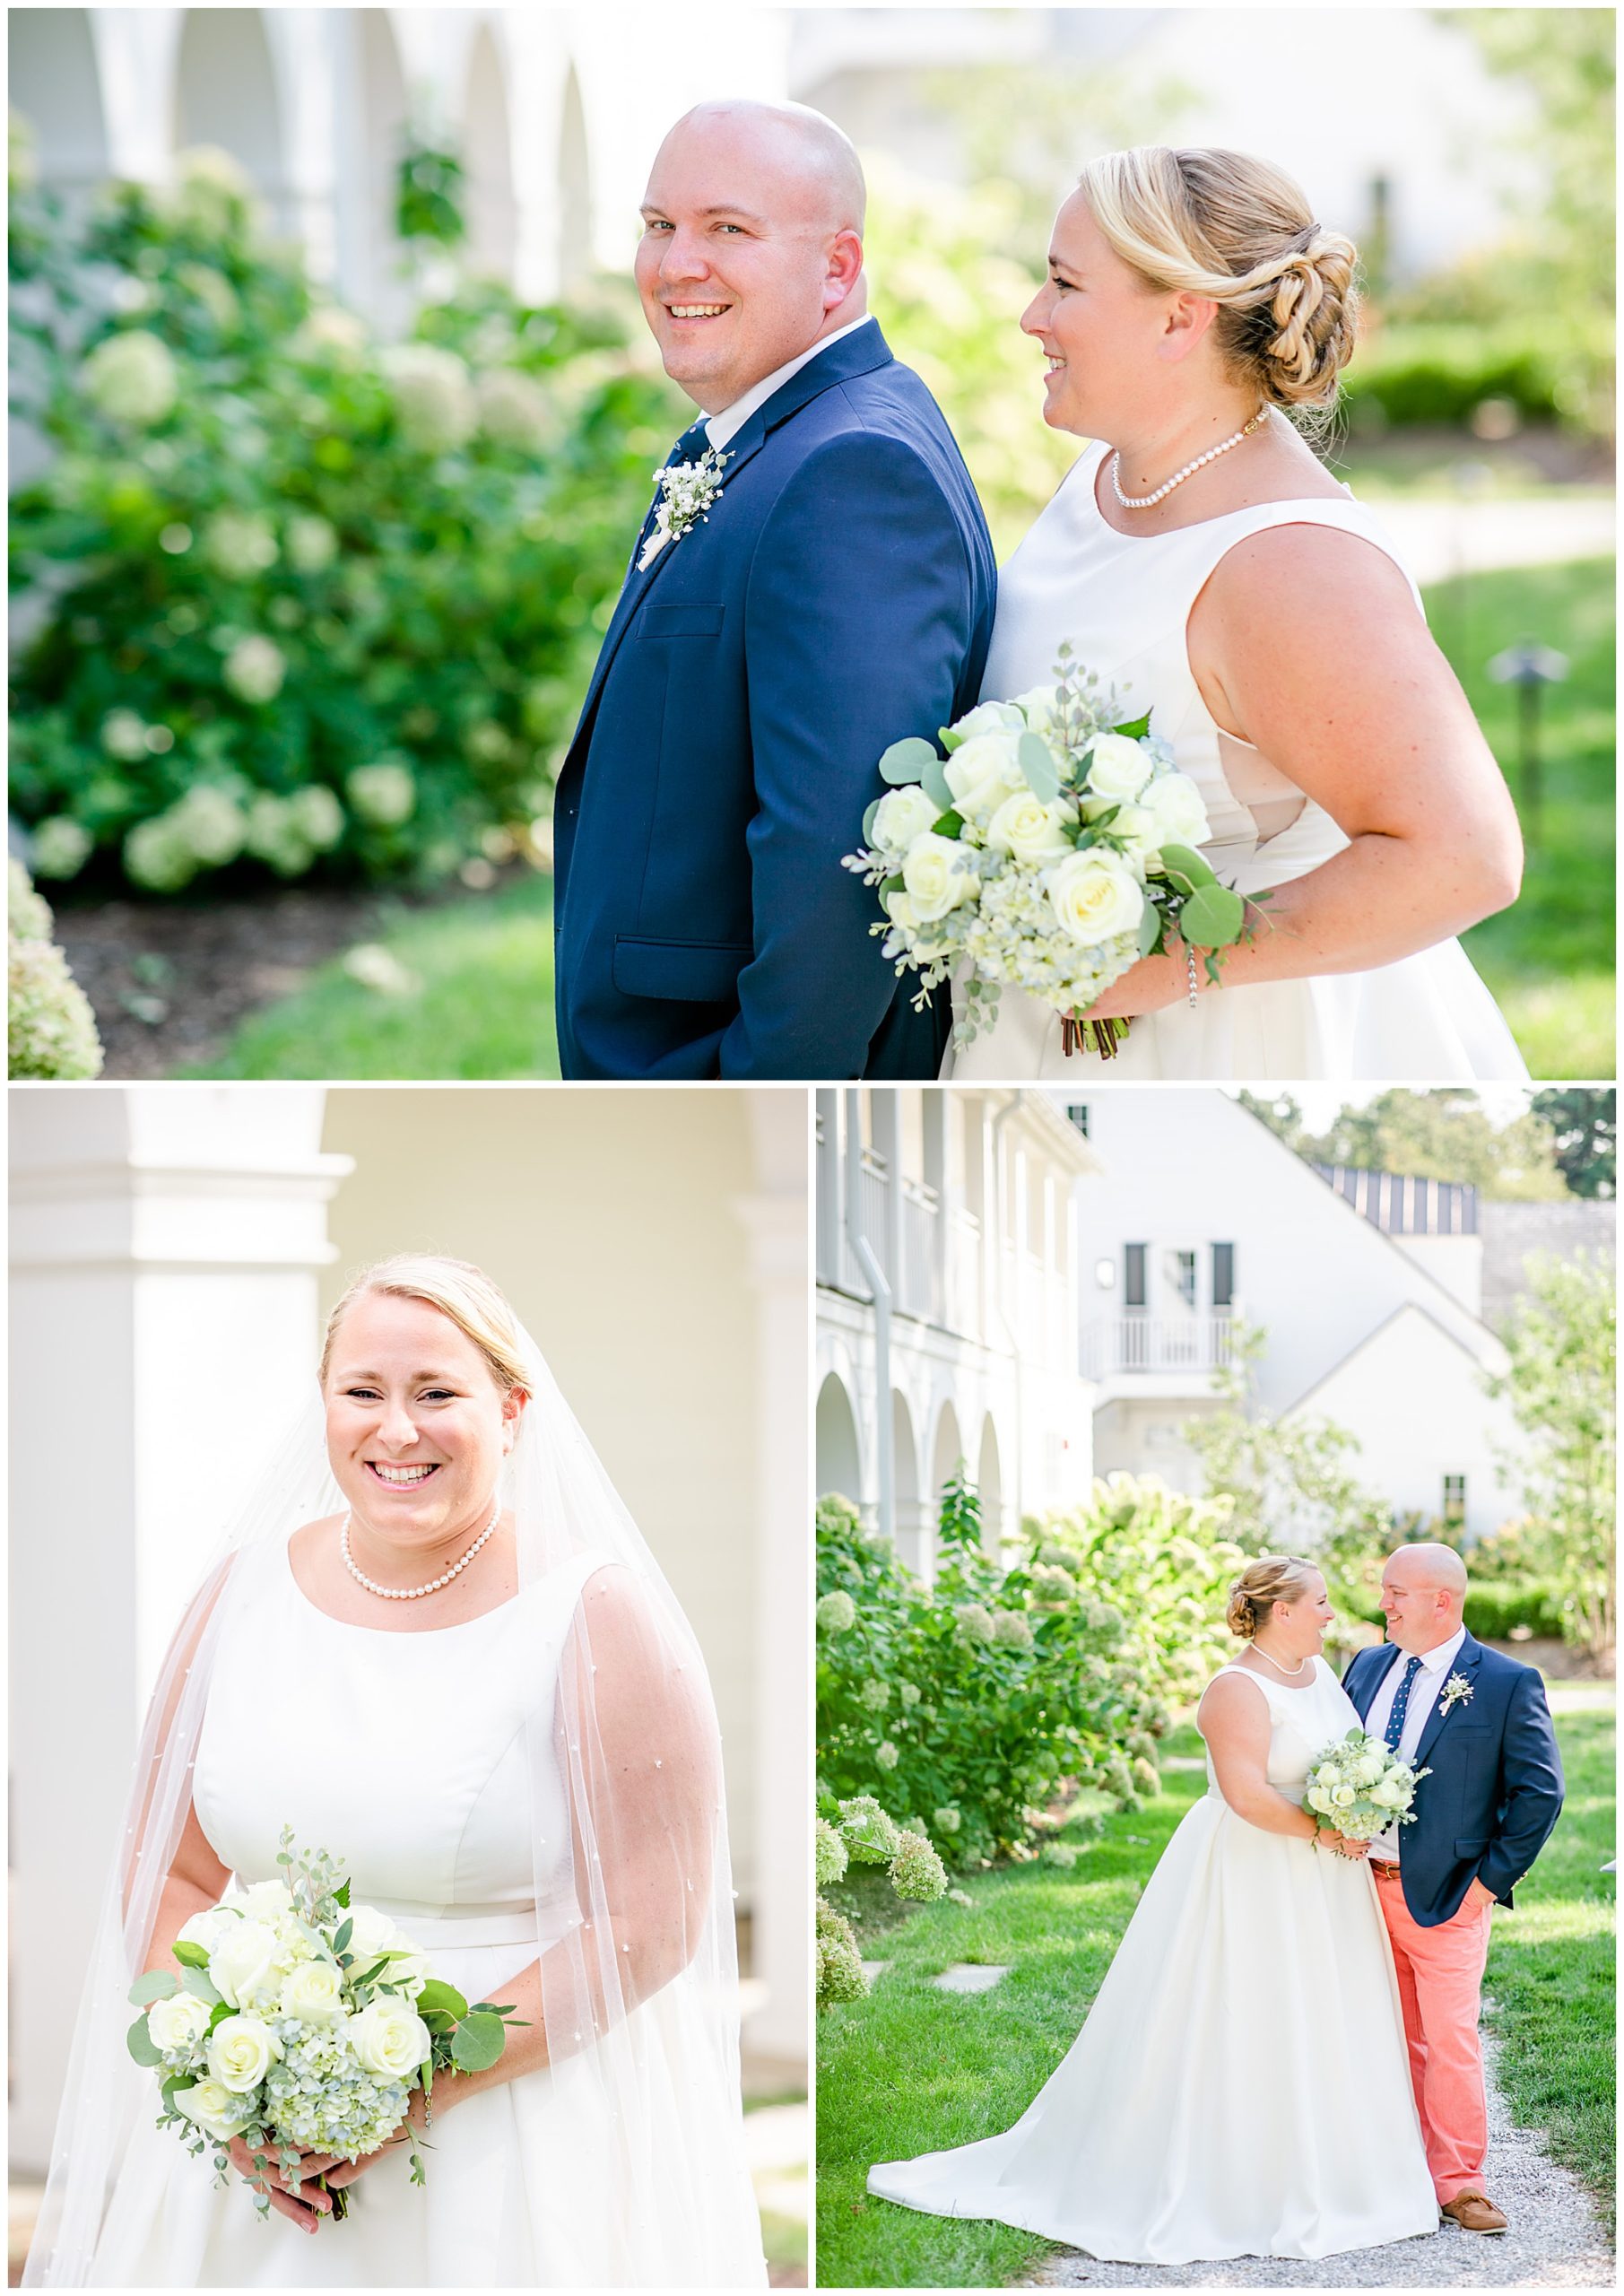 Nantucket inspired Gibson Island Club wedding, nautical wedding inspiration, Annapolitan wedding inspiration, Gibson Island Club wedding photography, Gibson Island Club wedding photographer, Annapolis wedding photographer, Baltimore wedding photographer, Maryland wedding photographer, nautical aesthetic, Annapolis wedding inspiration, Rachel E.H. Photography, bride looking at groom, bride and groom gazing at each other, bride with bouquet, York Flowers wedding bouquet